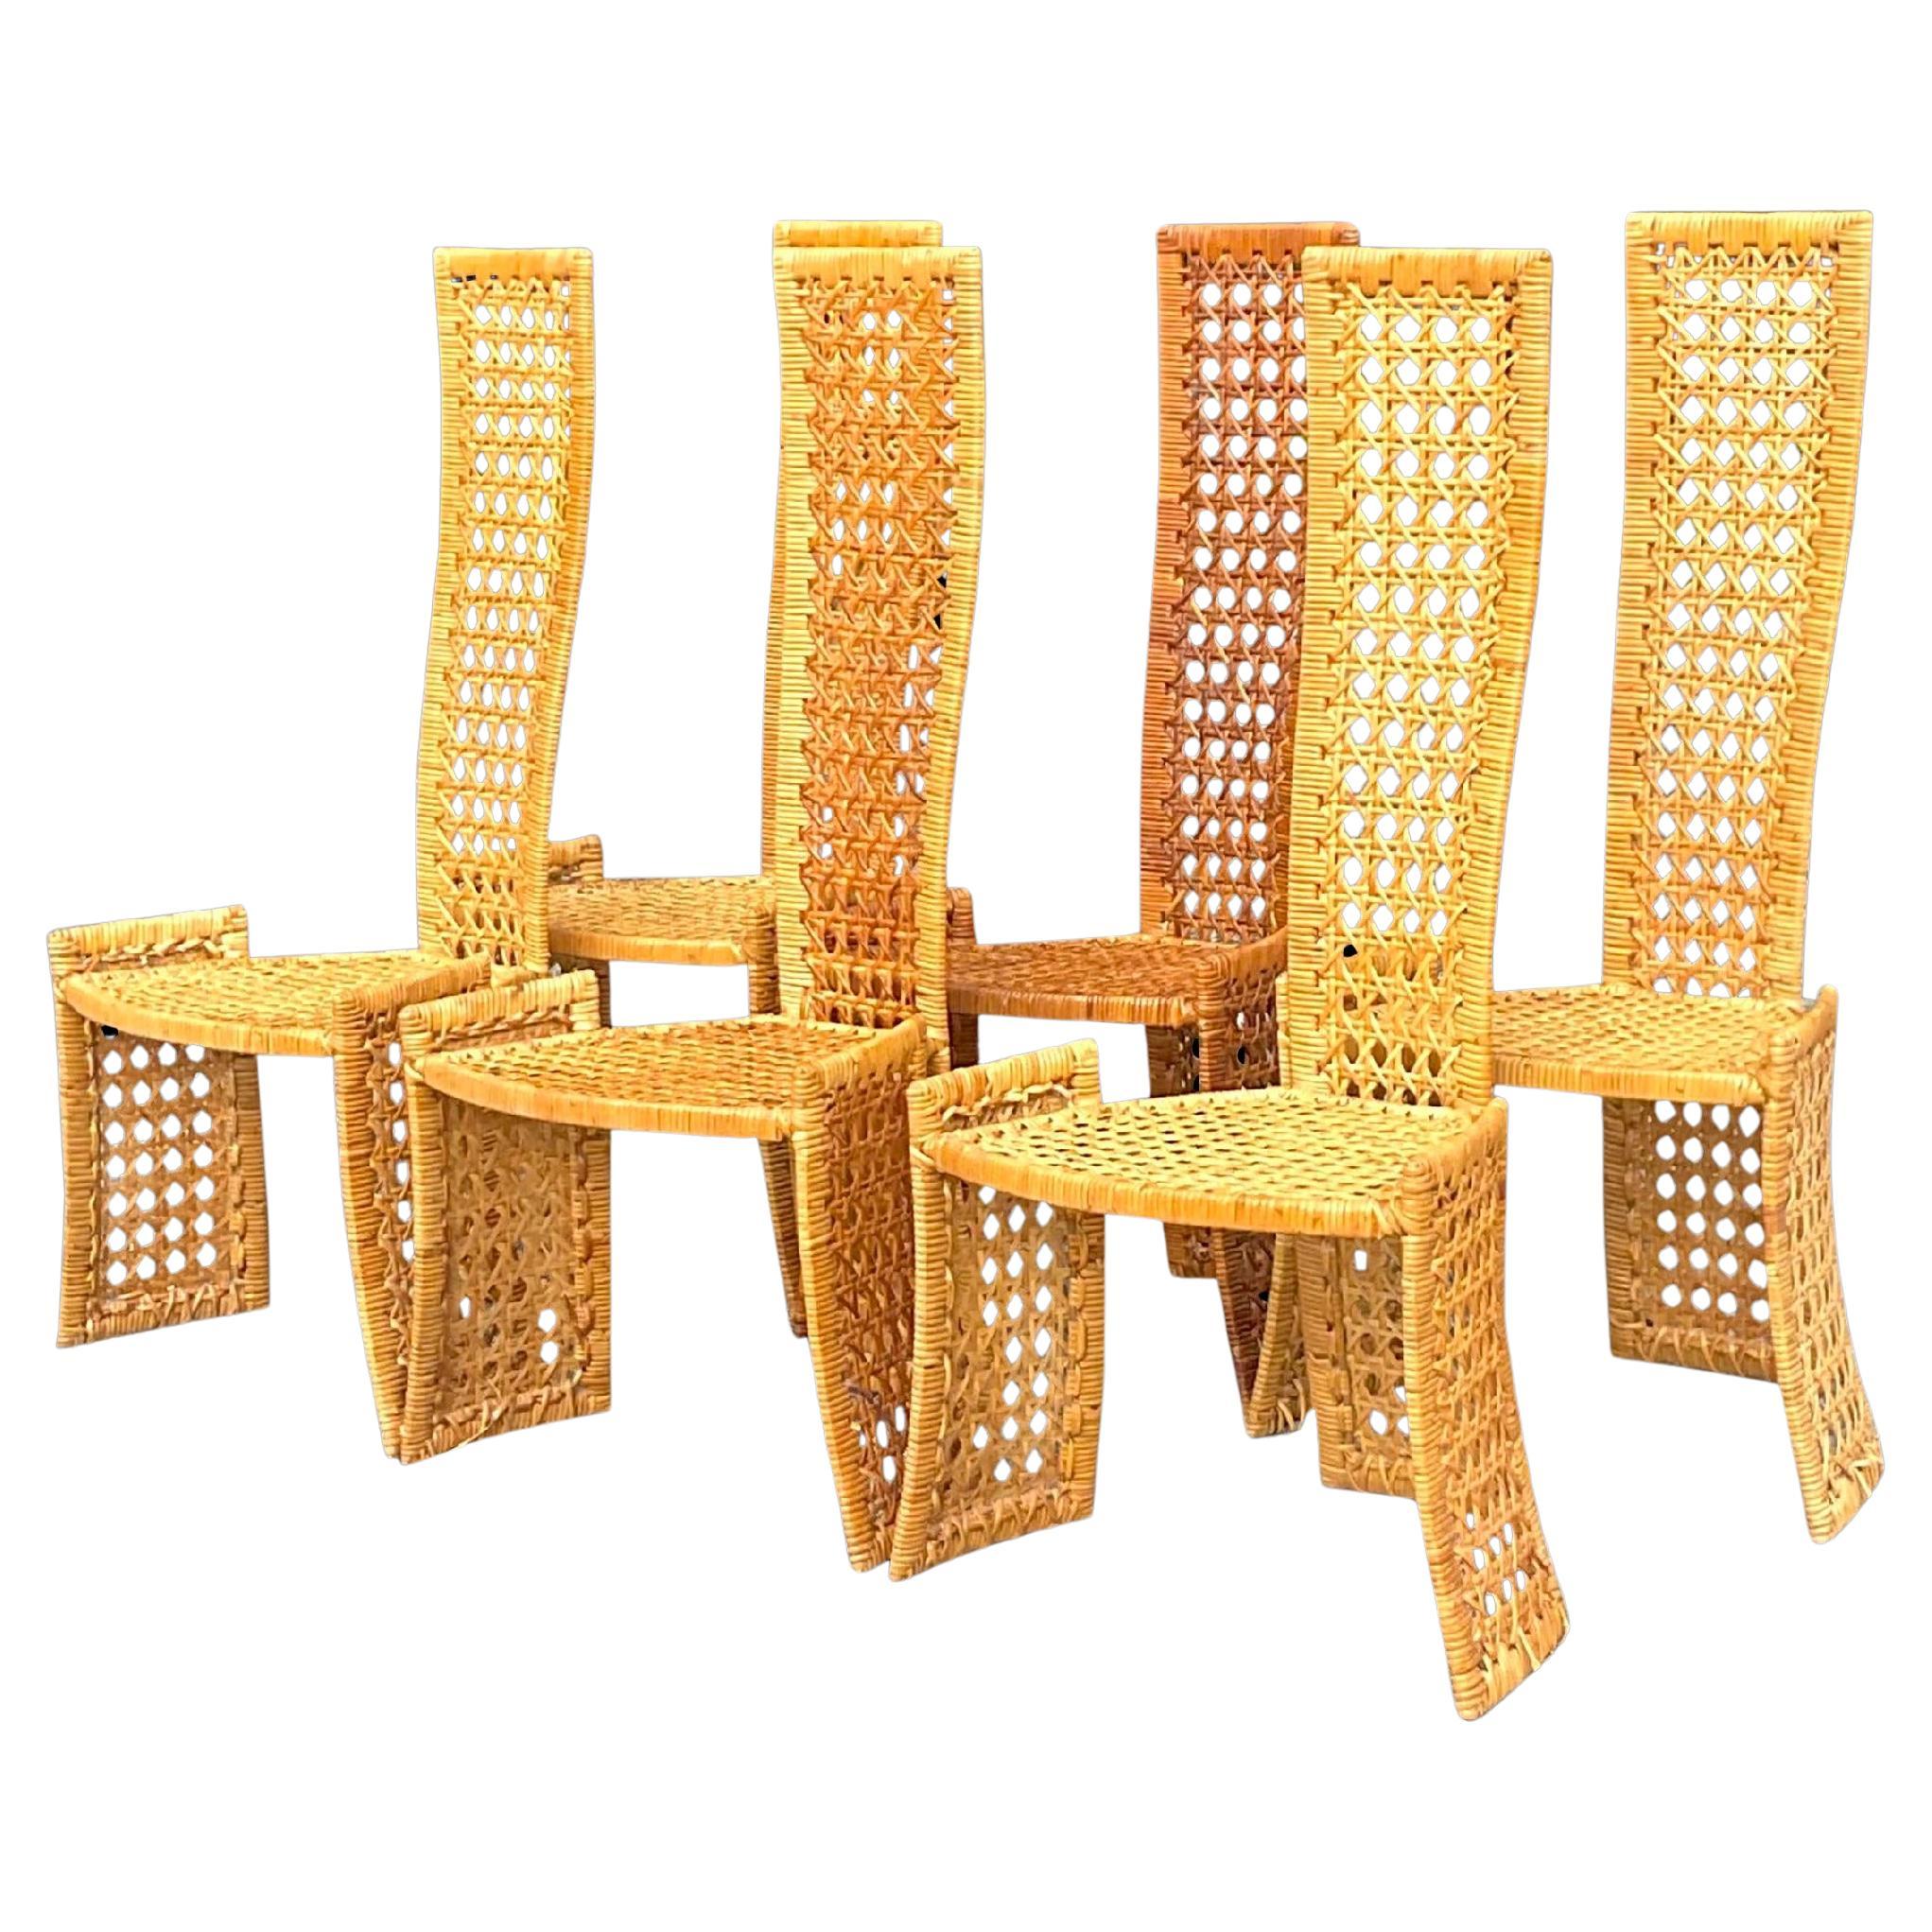 Vintage Coastal Woven Rattan Dining Chairs After Danny Ho Fong- Set of 6 For Sale